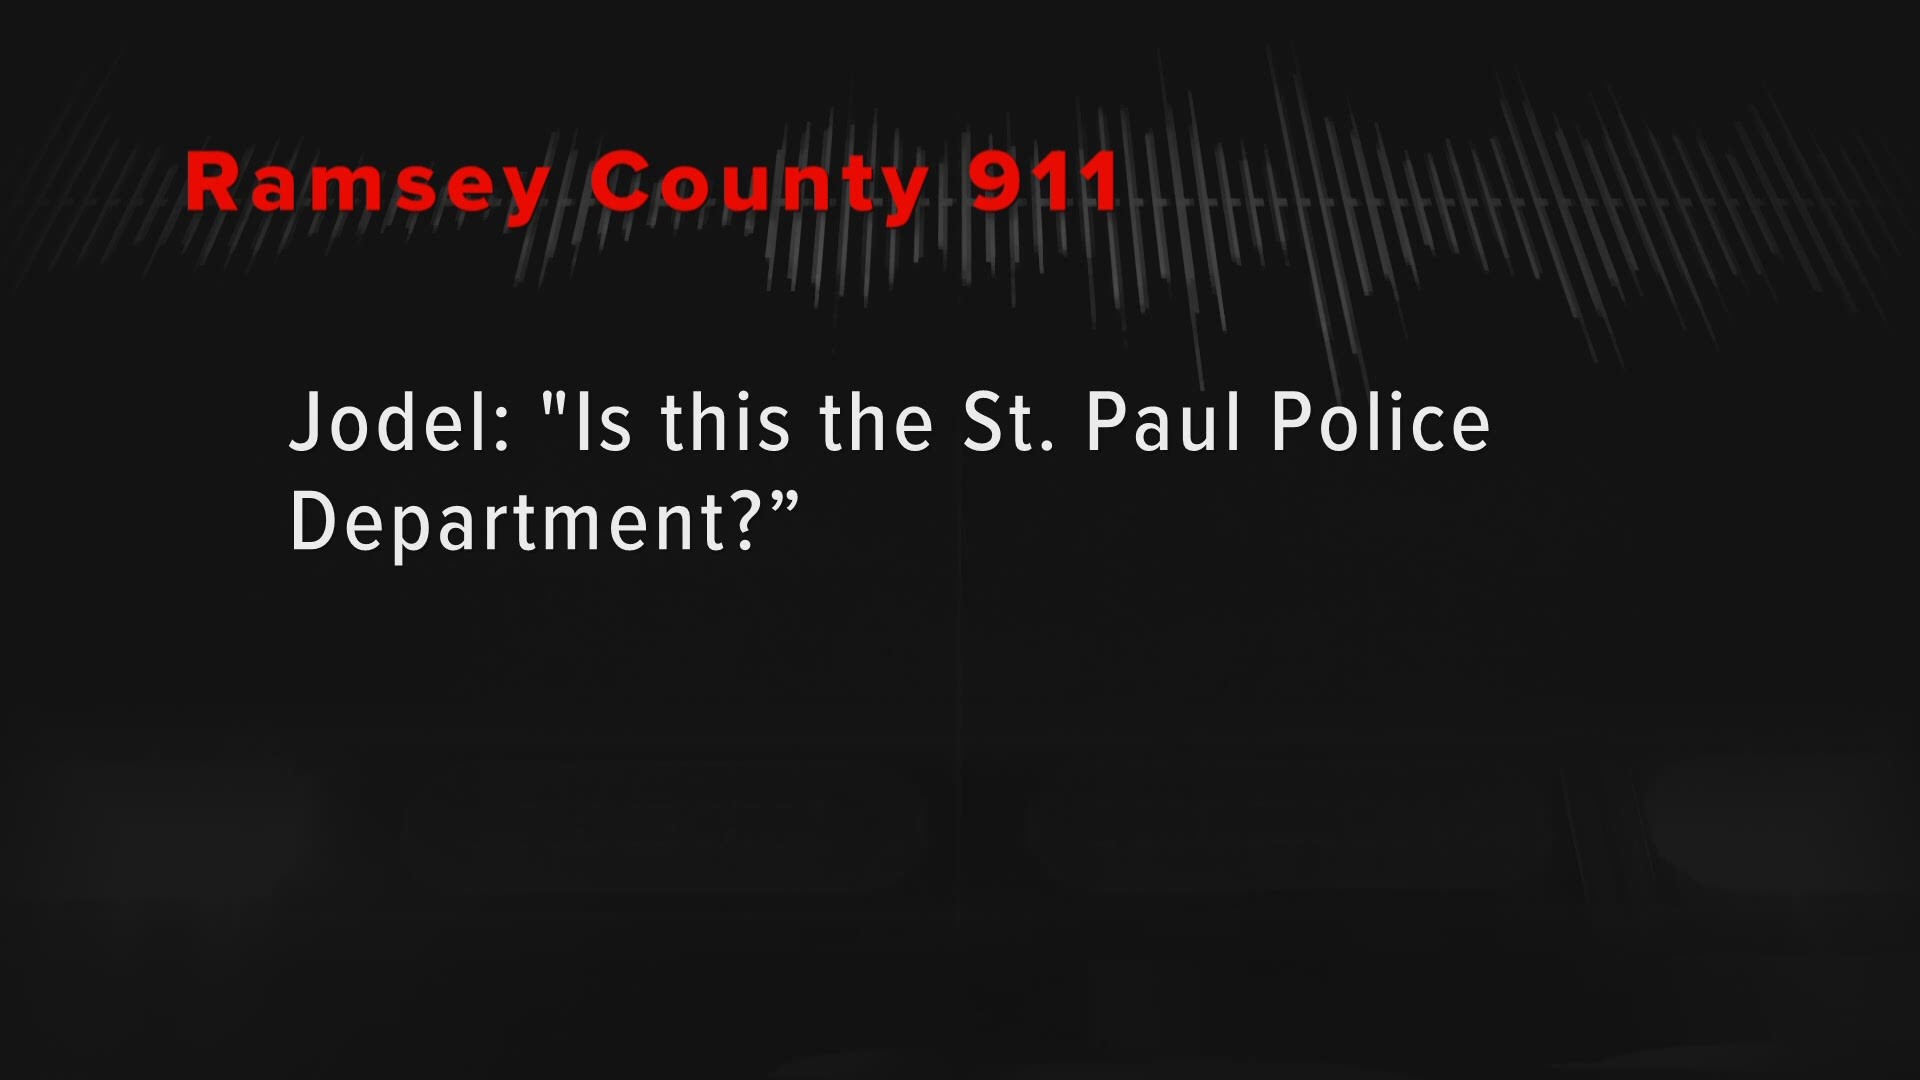 When Jodel was only 16 years old, she called the Ramsey County 911 dispatch desperately seeking help.  Here is her complete 911 call as she tried to escape the men who trafficked her.